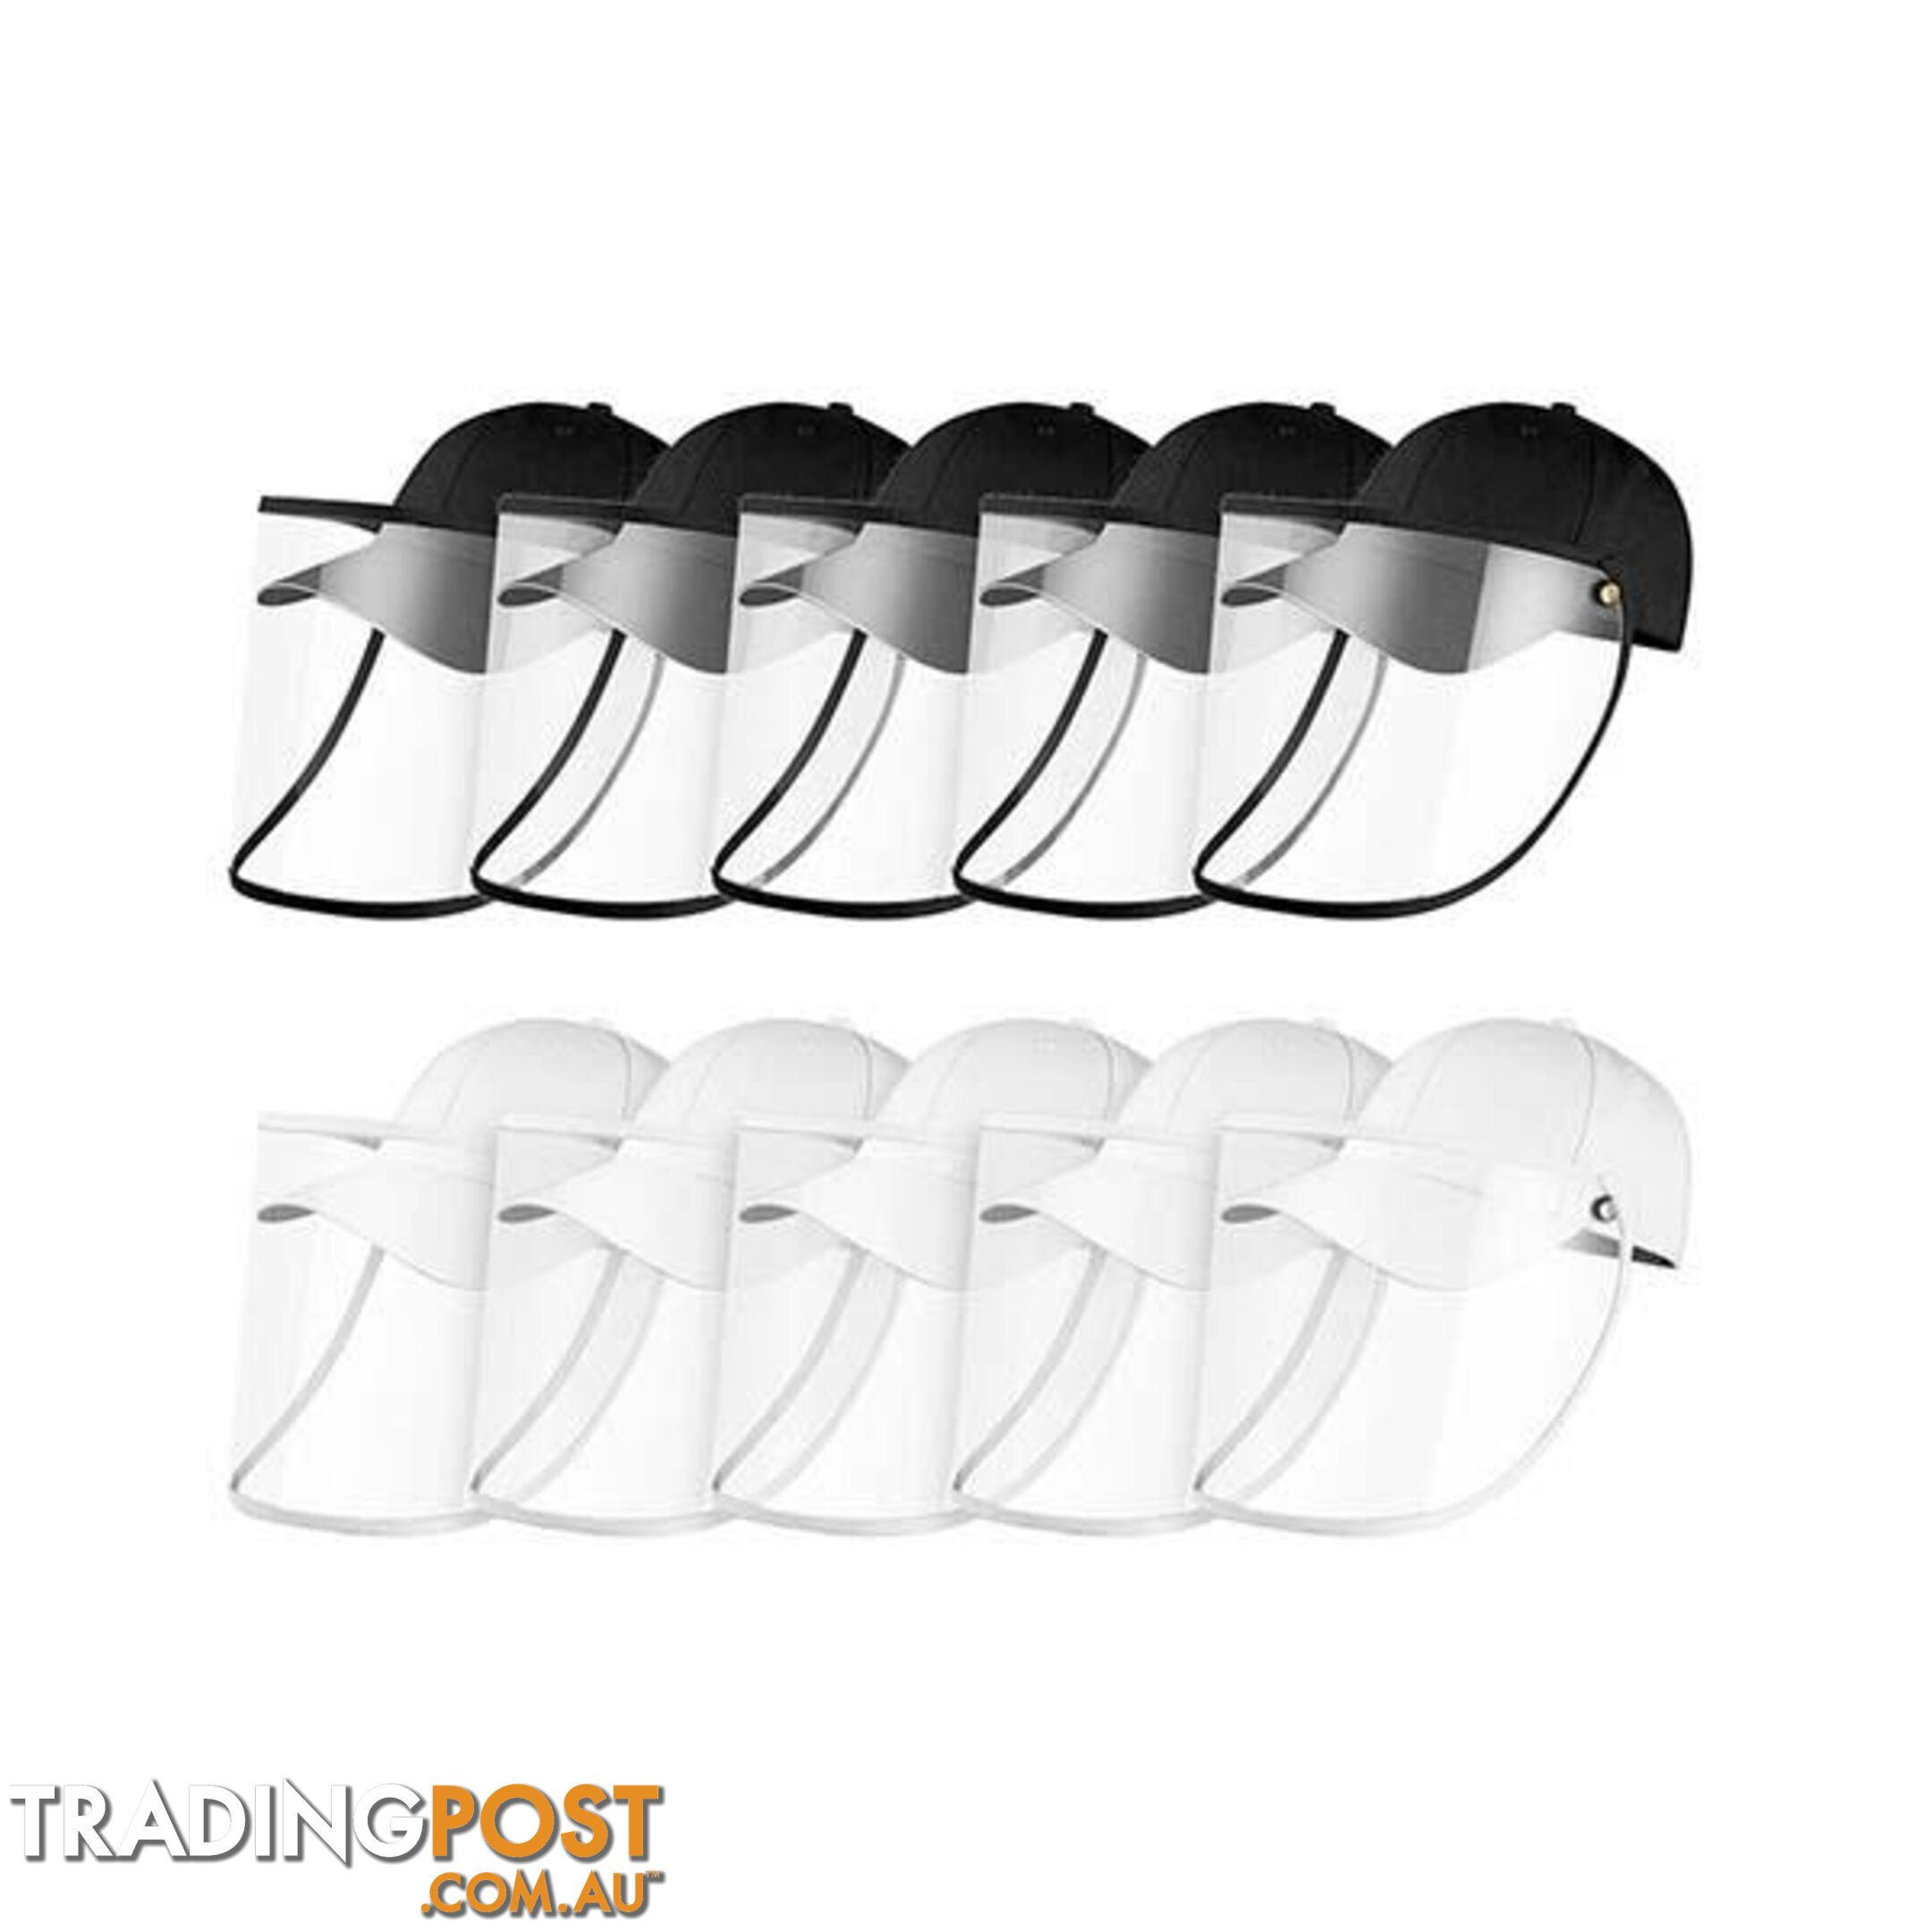 10X Outdoor Hat Anti Fog Dust Saliva Cap Face Shield Adult Black White - Unbranded - 9476062095284